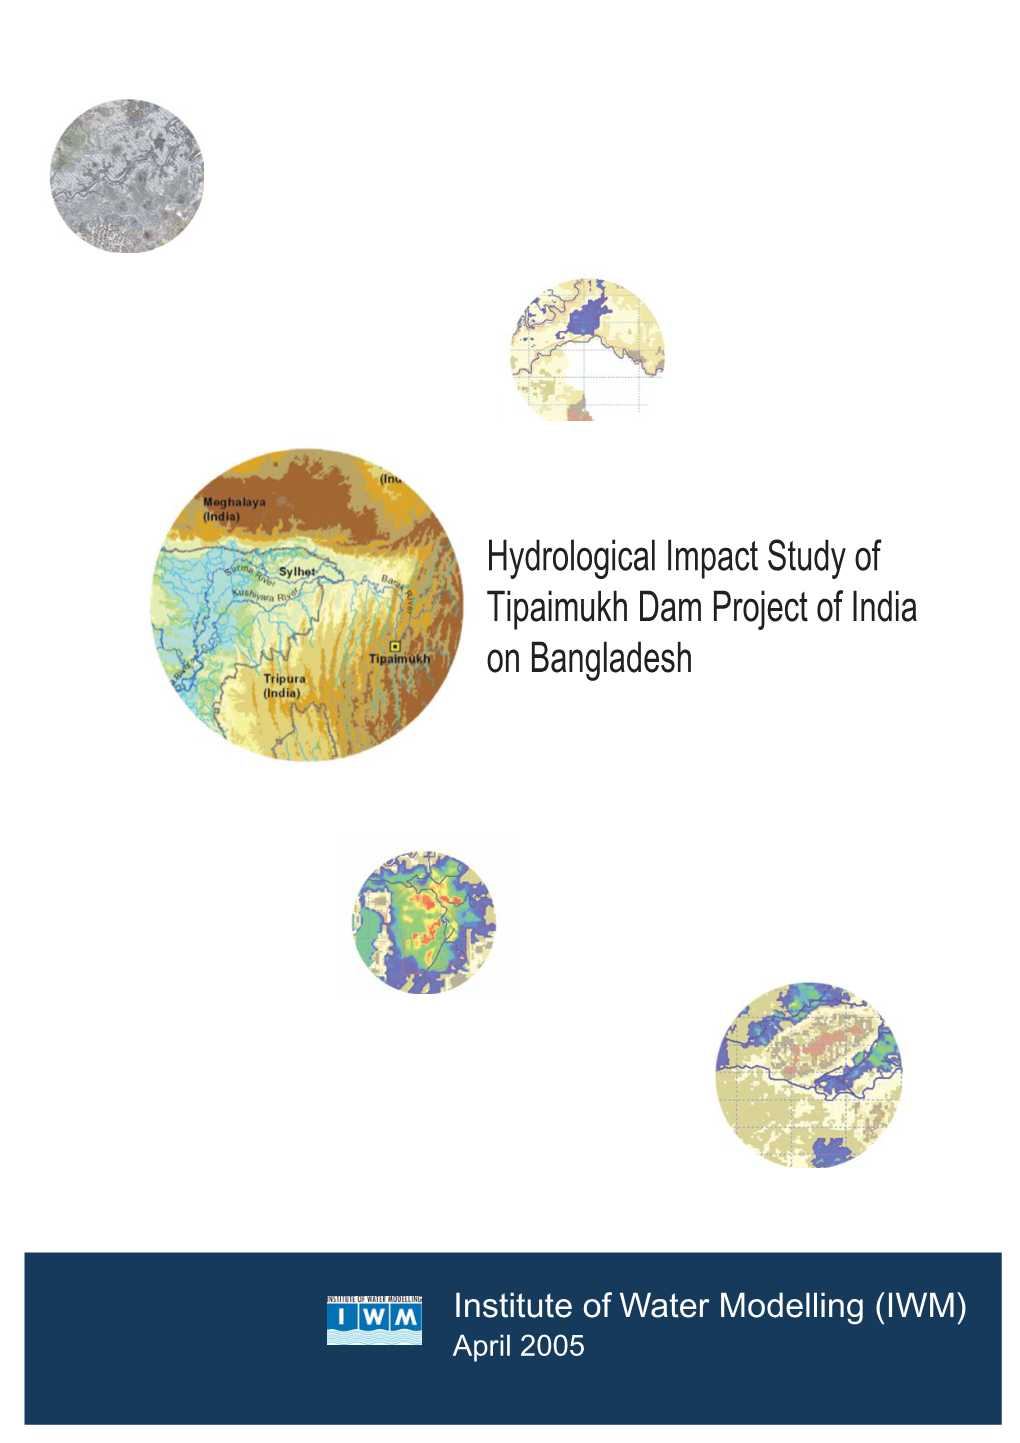 Hydrological Impact Study of Tipaimukh Dam Project of India on Bangladesh